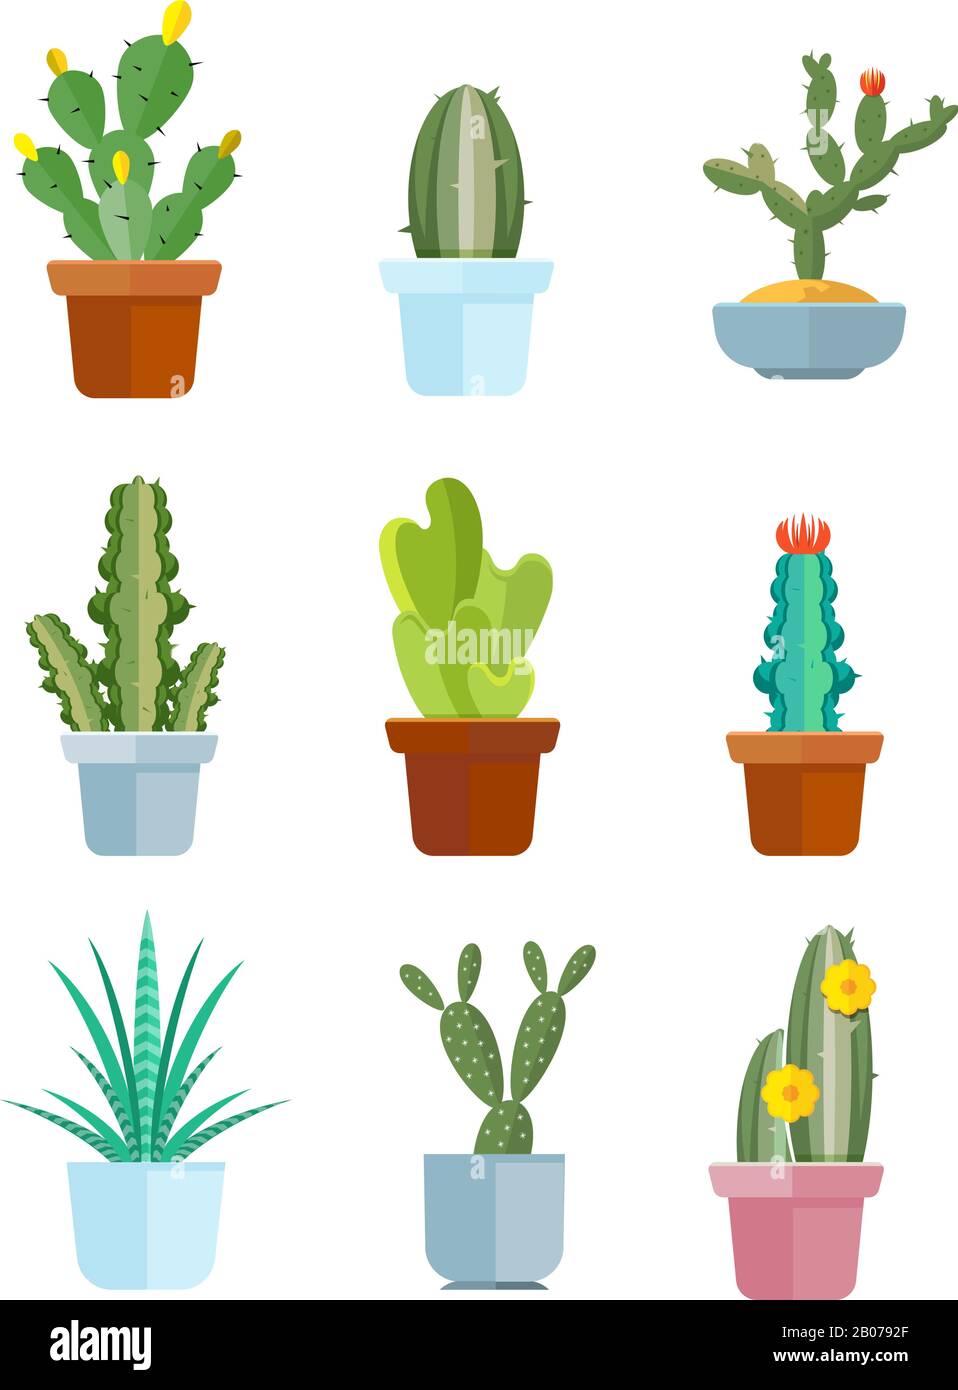 Cactus cartoon Cut Out Stock Images & Pictures - Alamy